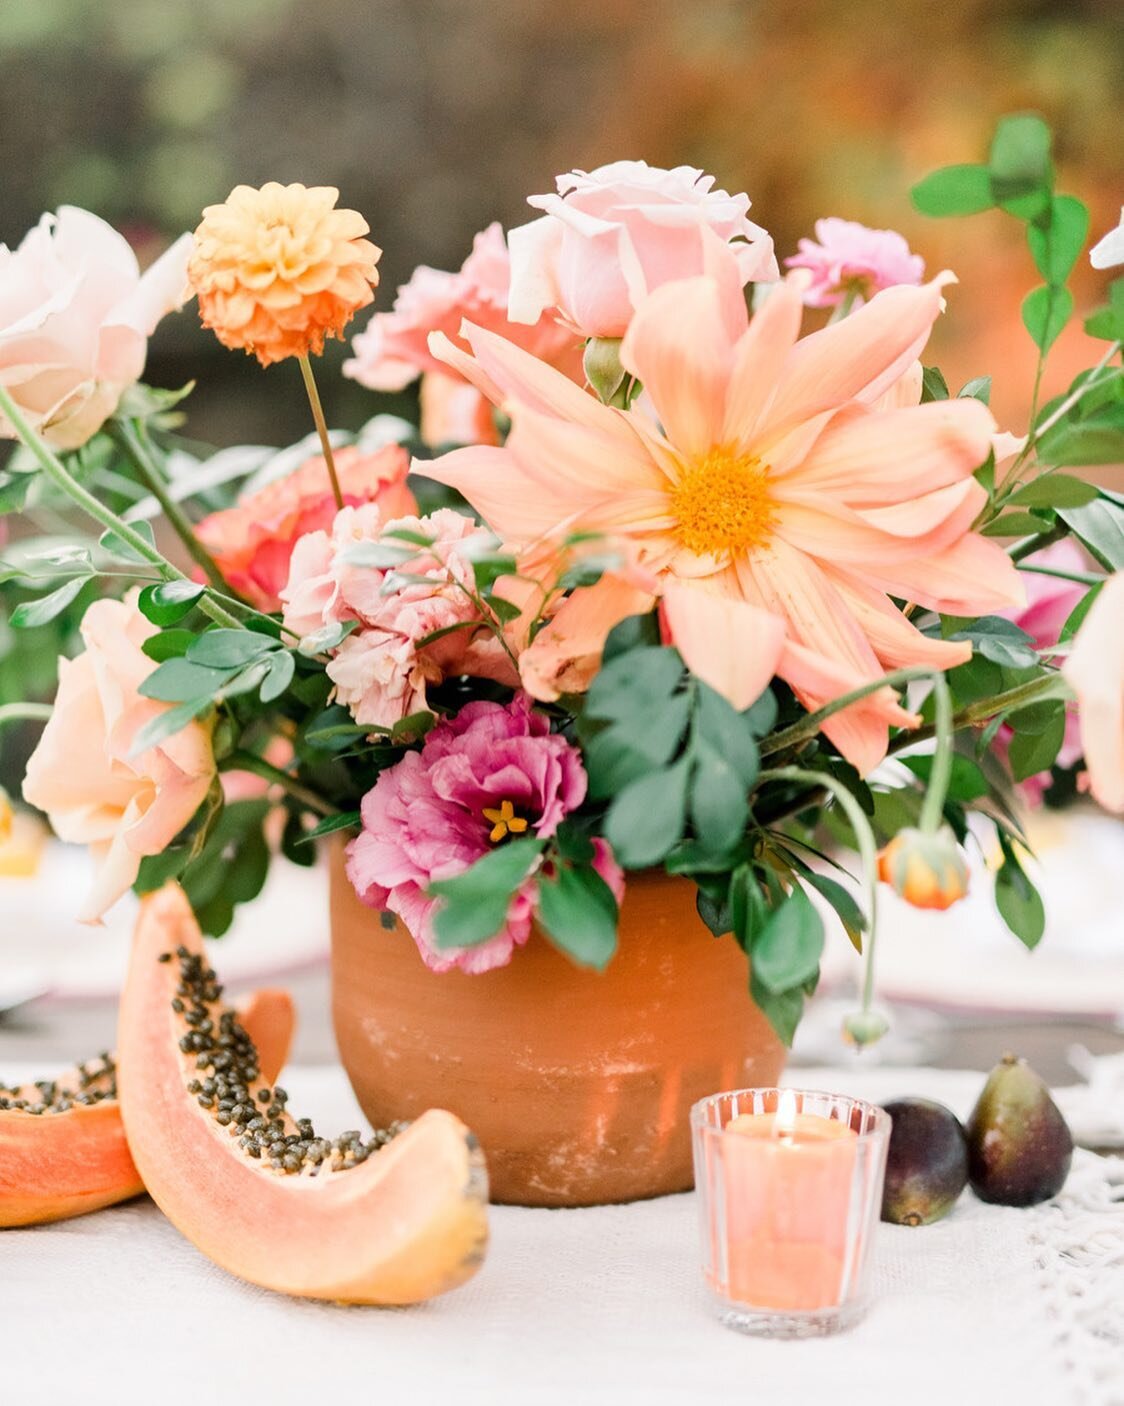 I loved the combination of fresh fruit, candles and bright florals as centerpieces at this Welcome Dinner at the Belmond Casa Sierra Nevada in San Miguel de Allende. Coming soon to Style Me Pretty
//
Photography: @janinelicarephotography 
Planning: @